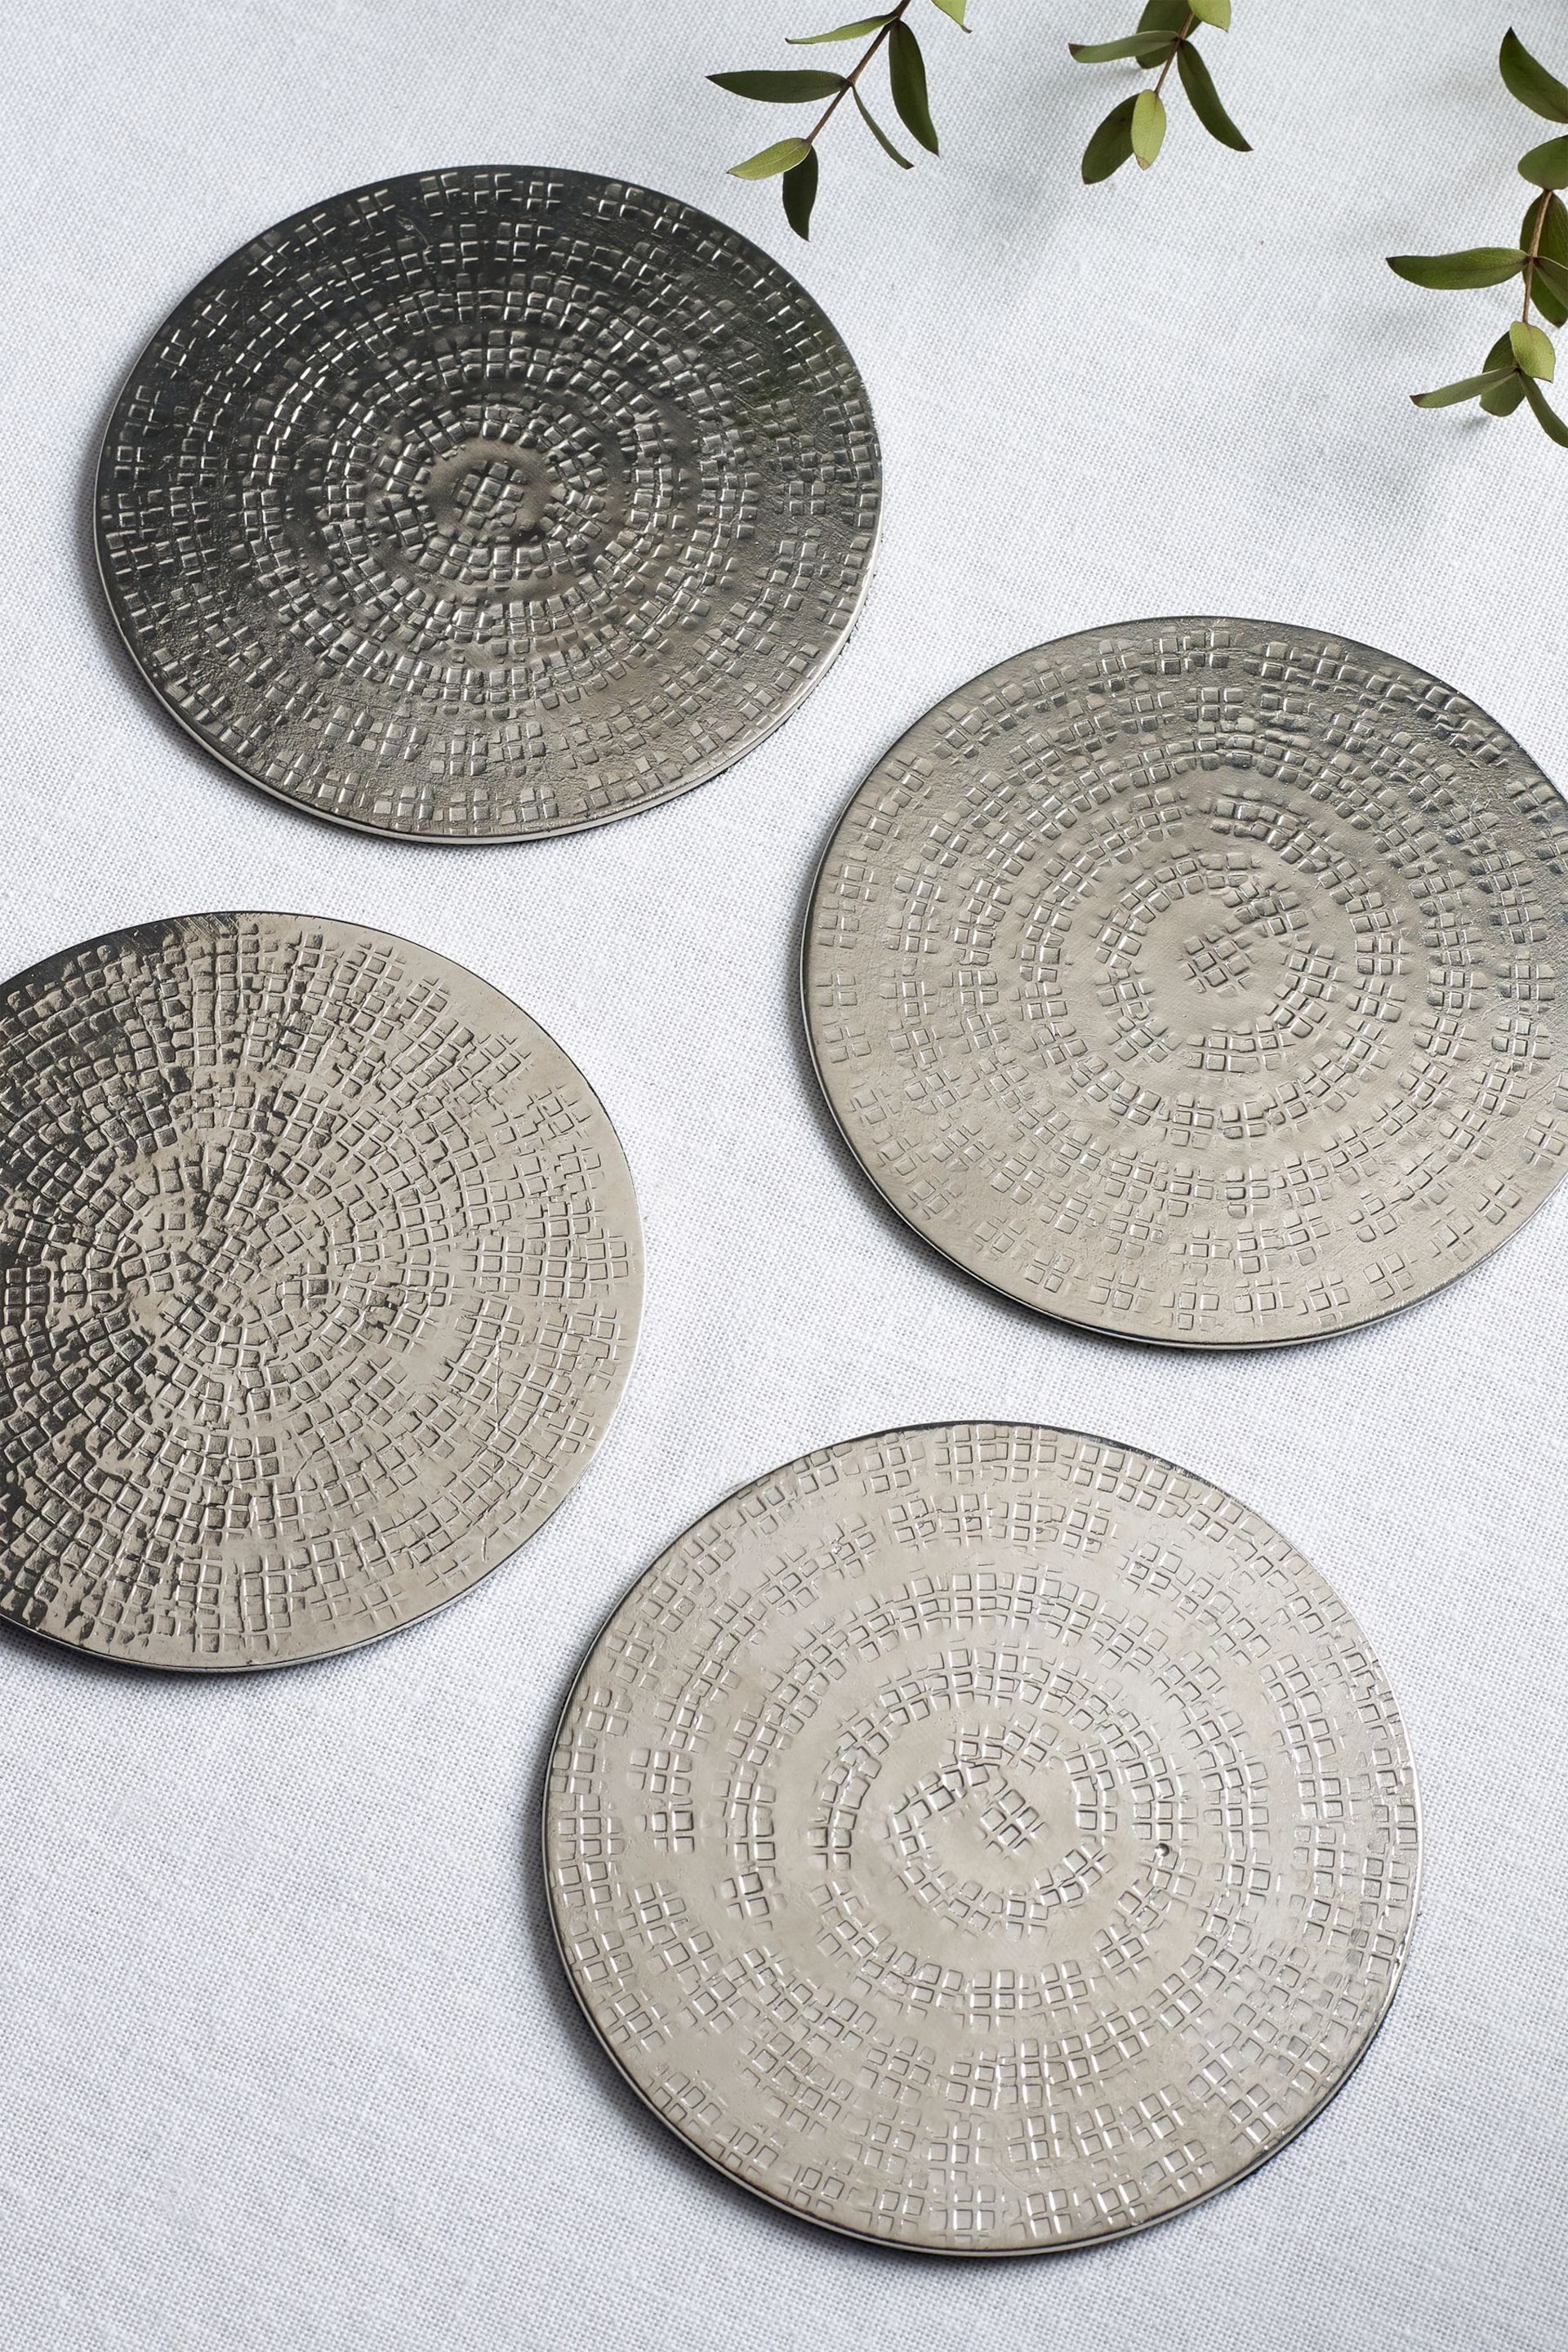 Silver Hammered Metal Placemats and Coasters Set of 4 Coasters - Image 2 of 3